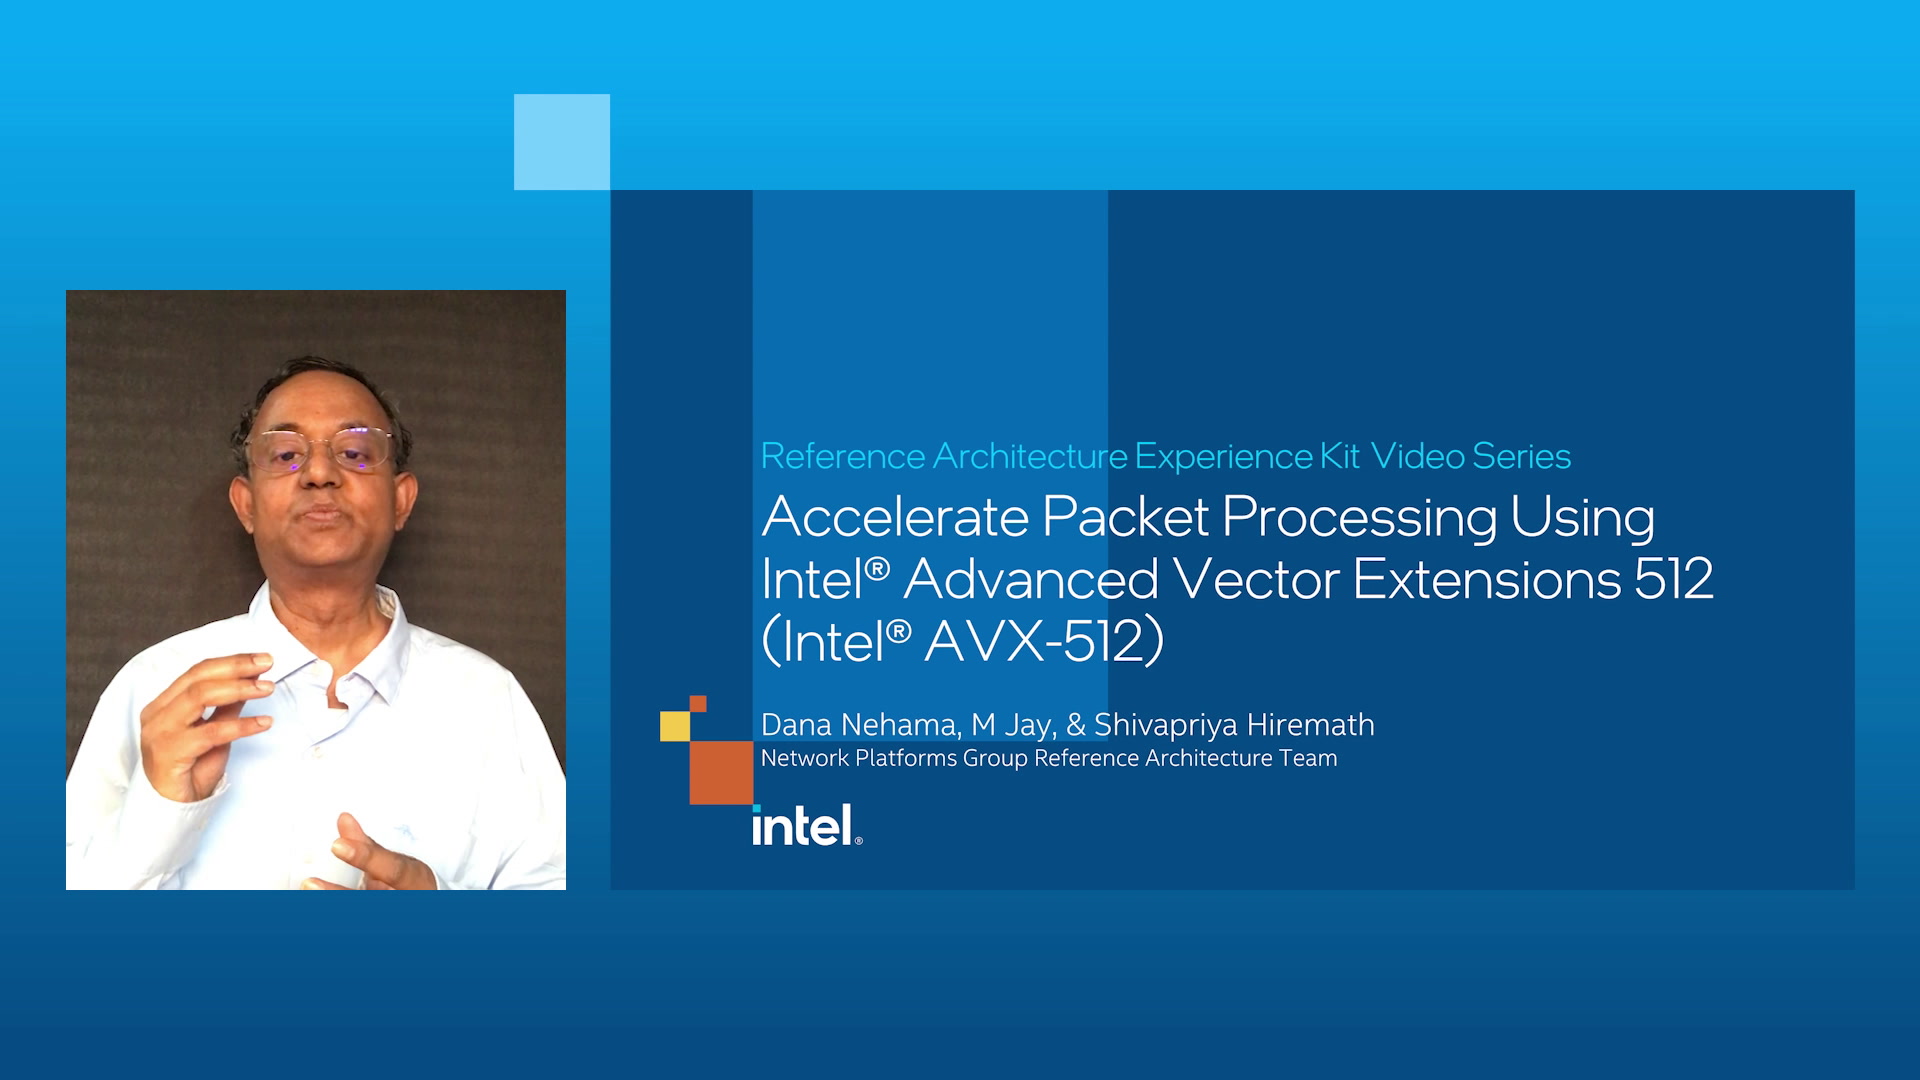 Chapter 1: Accelerate Packet Processing Using Intel® Advanced Vector Extensions 512 (Intel® AVX-512)